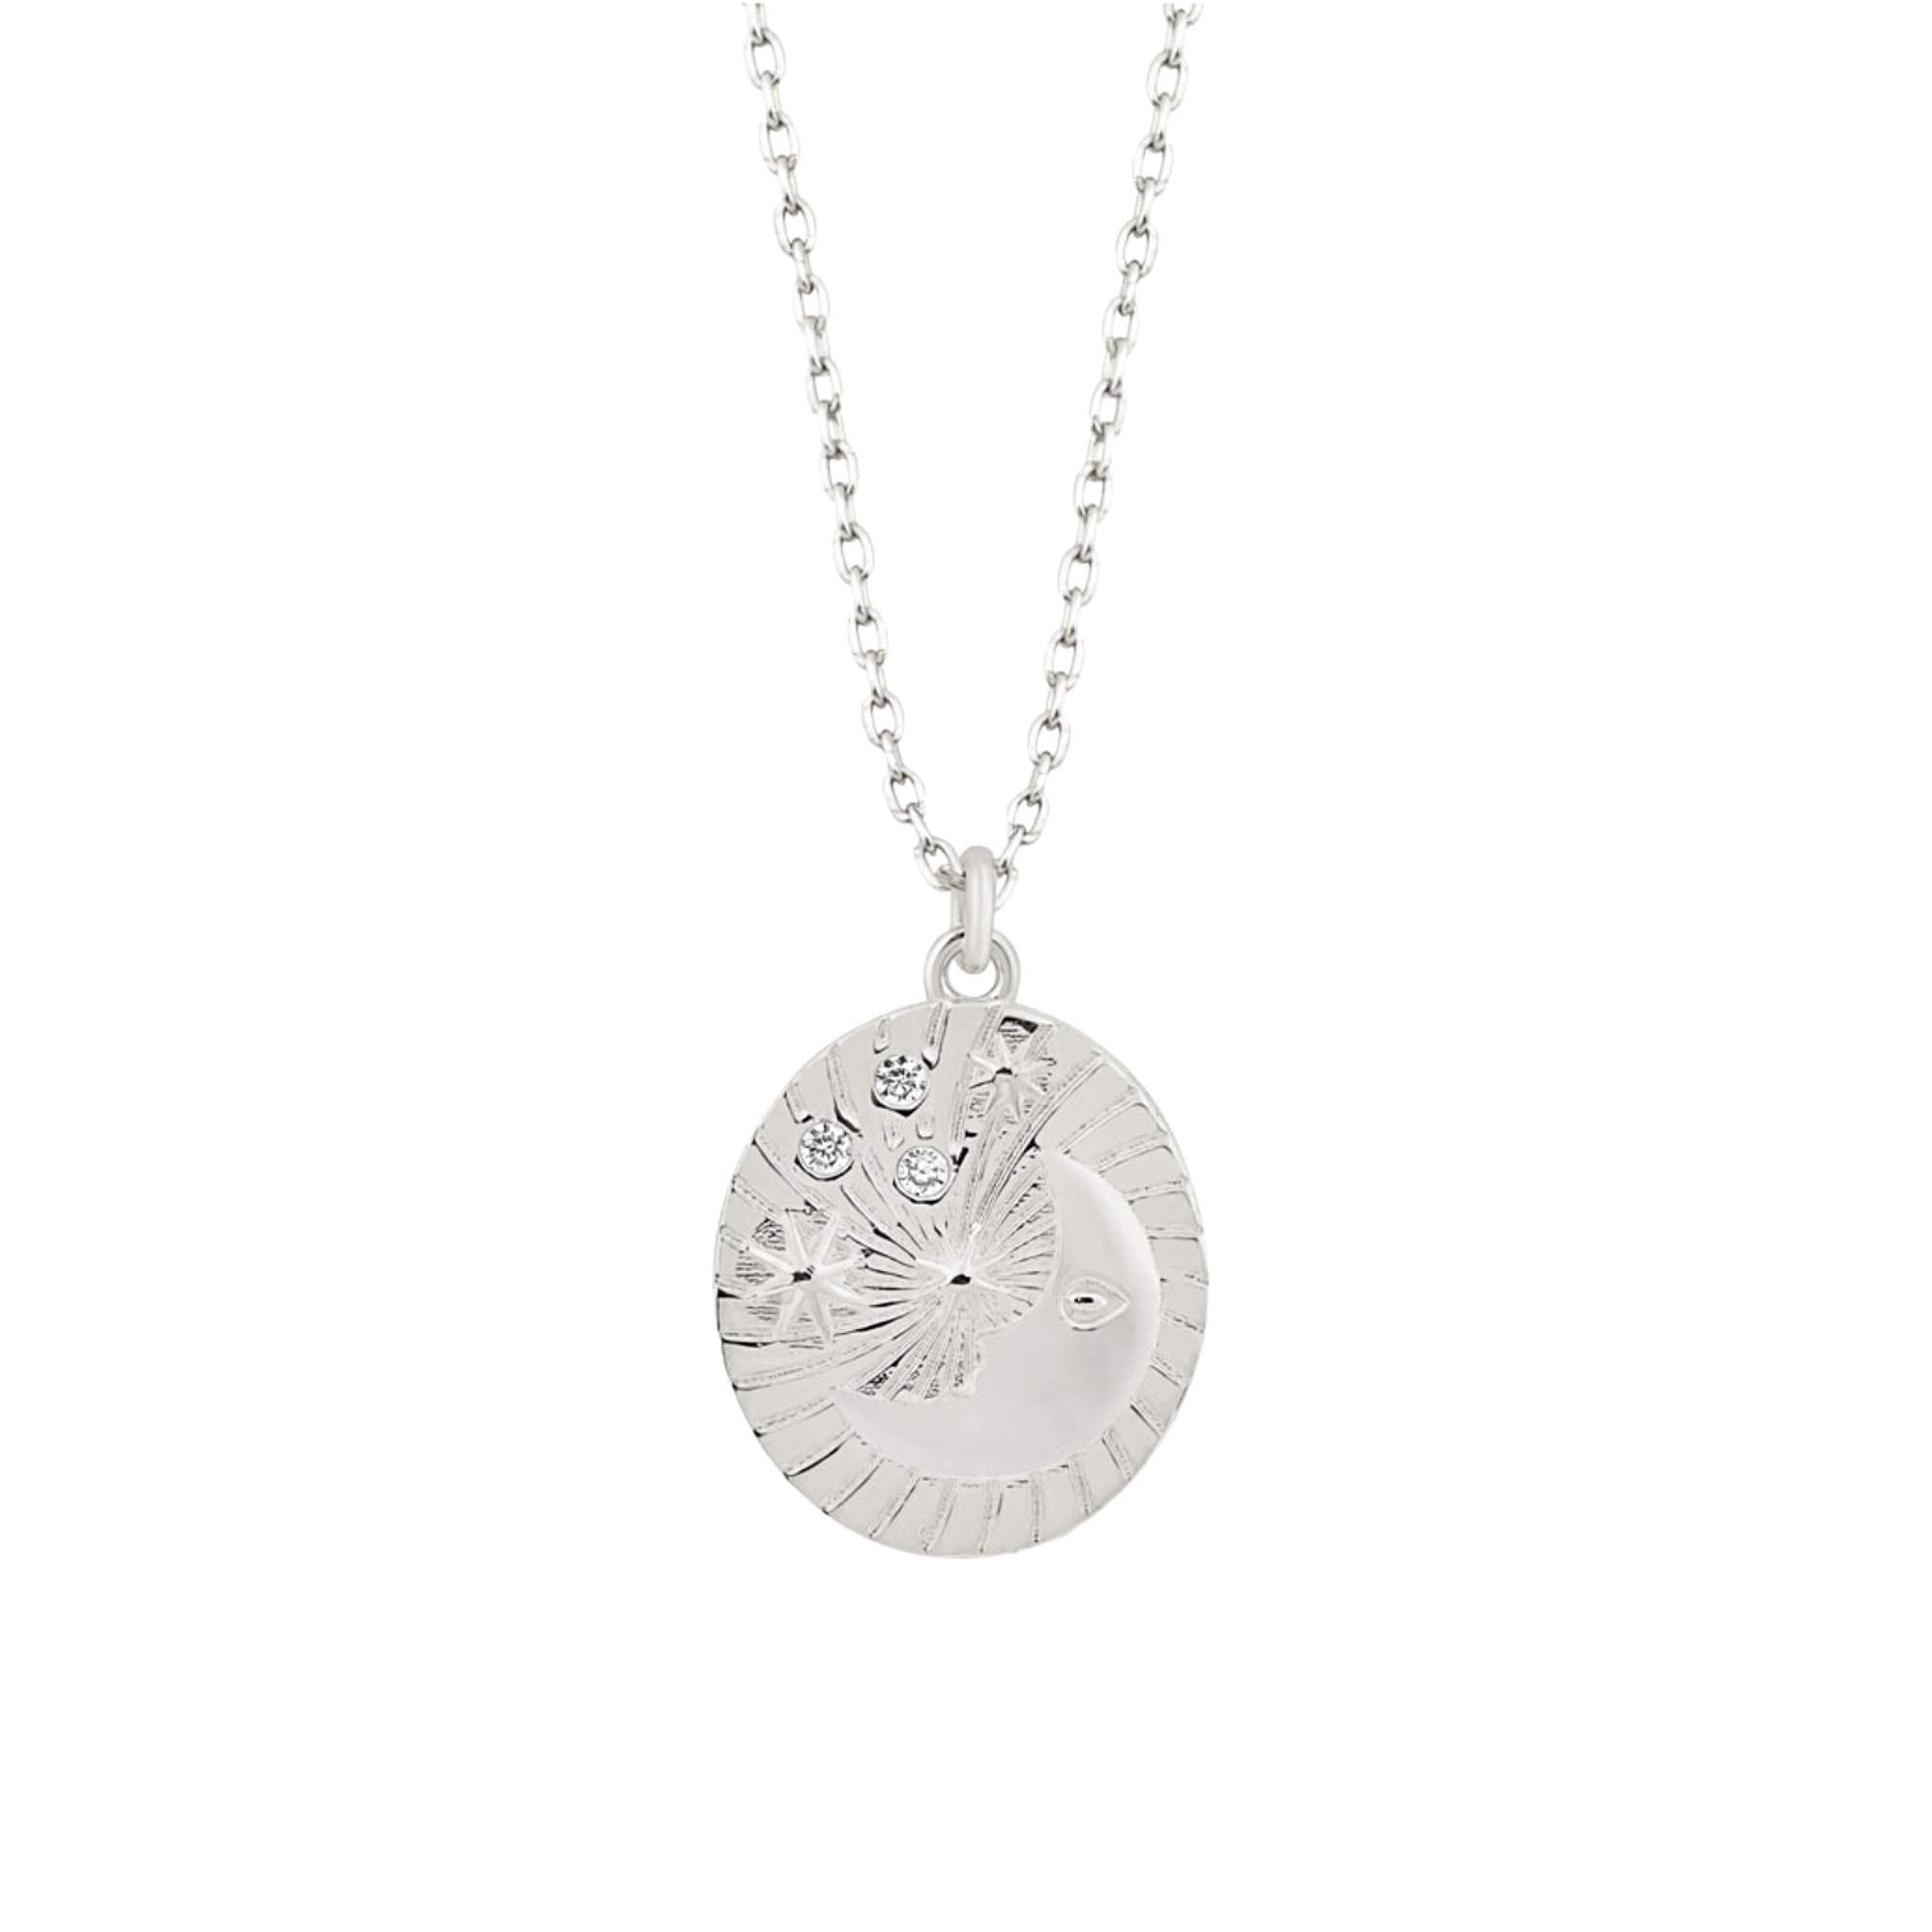 Moon Embossed Silhouette Sterling Silver Medal Necklace